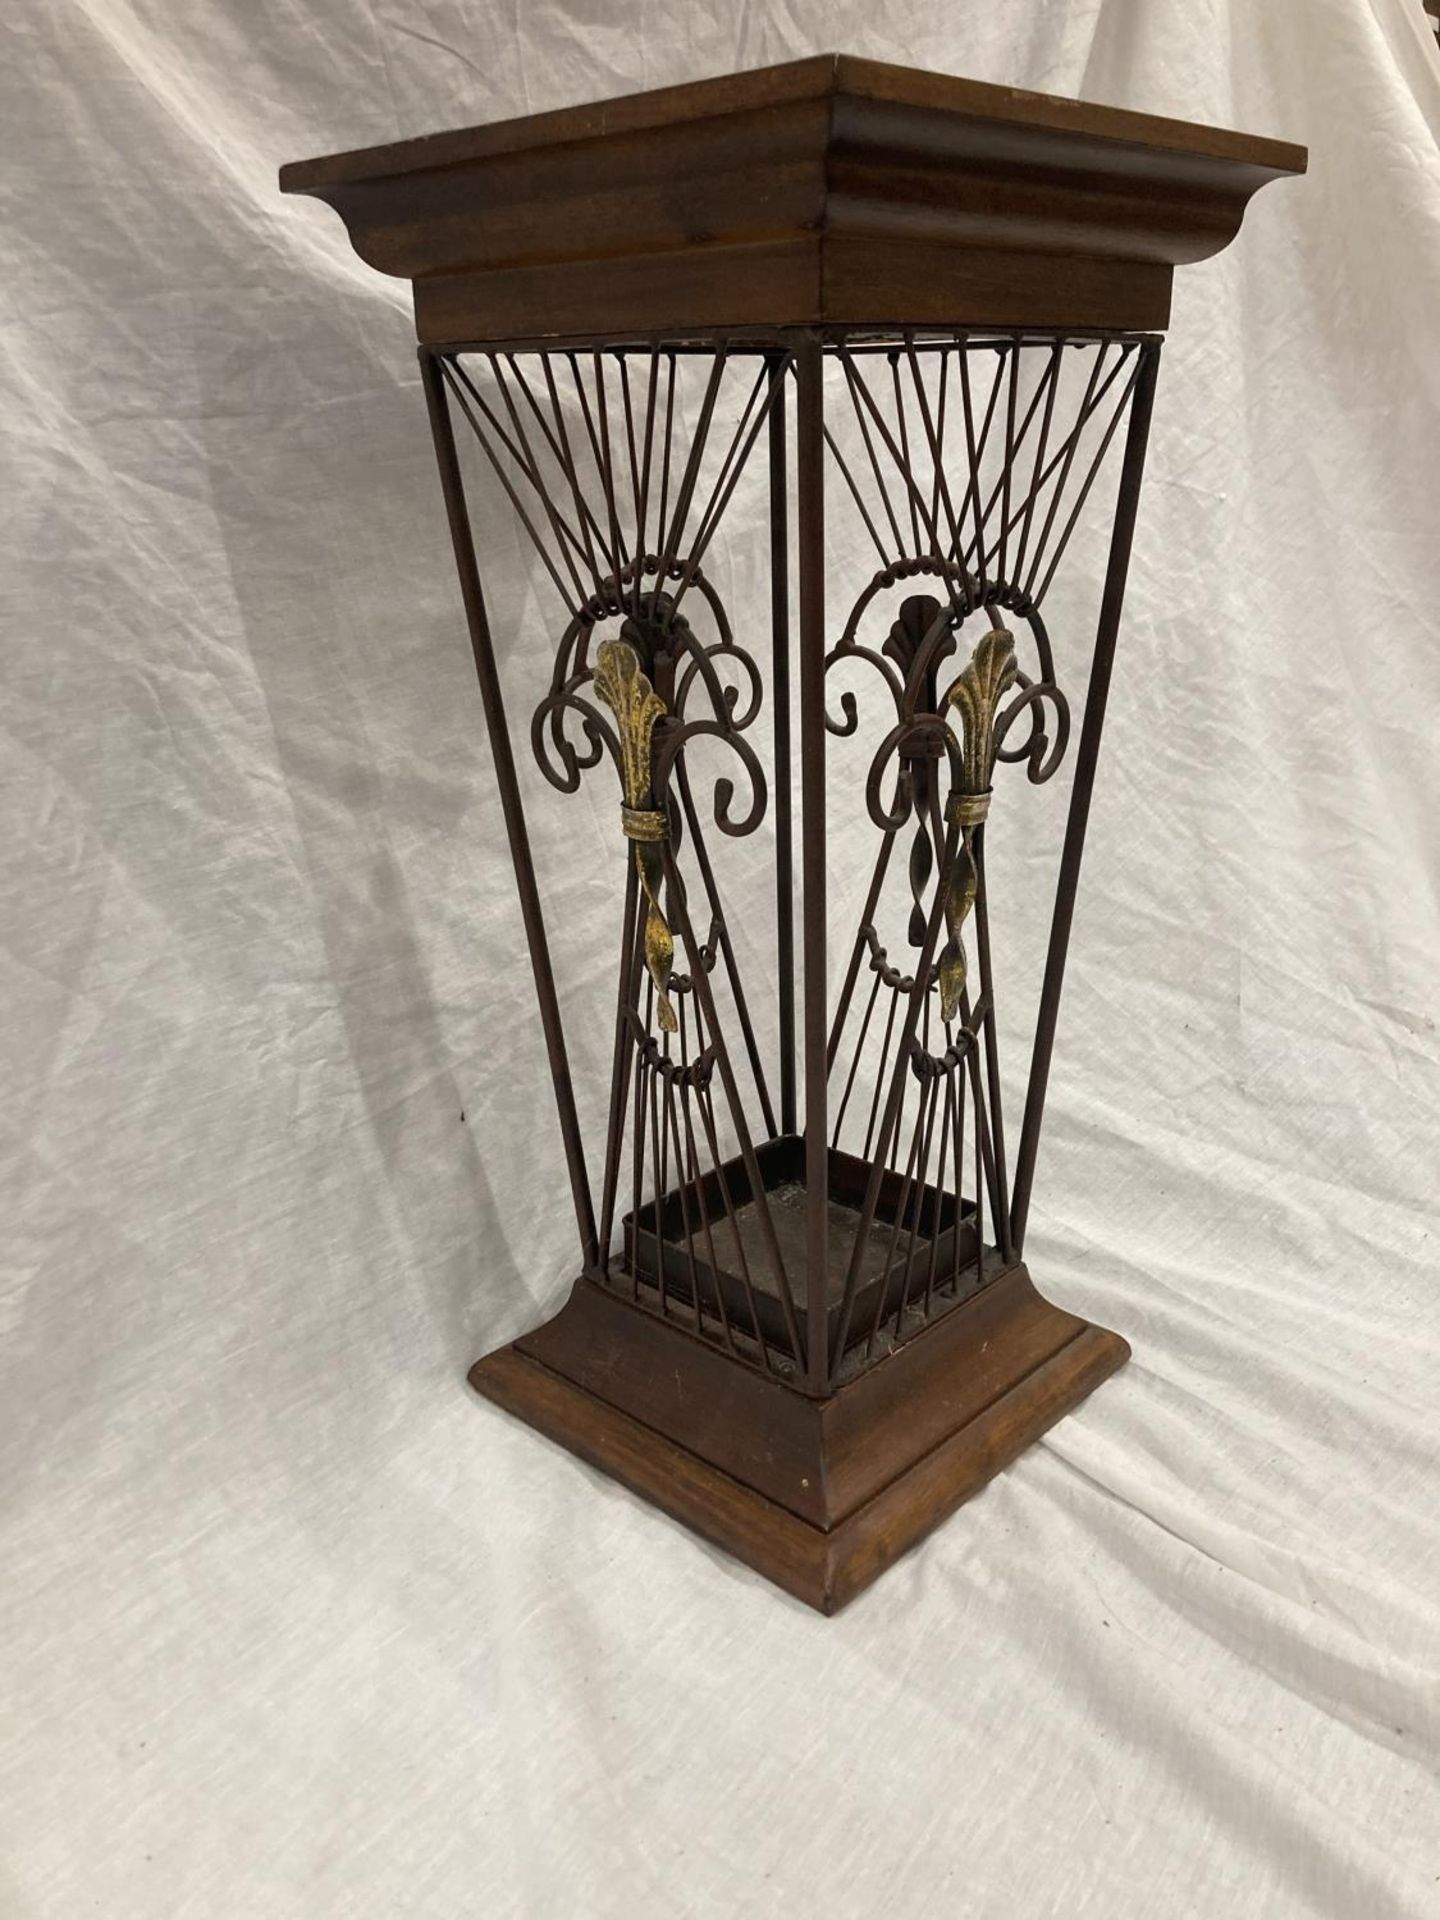 A VINTAGE STYLE WOOD AND WROUGHT IRON UMBRELLA STAND - Image 4 of 5